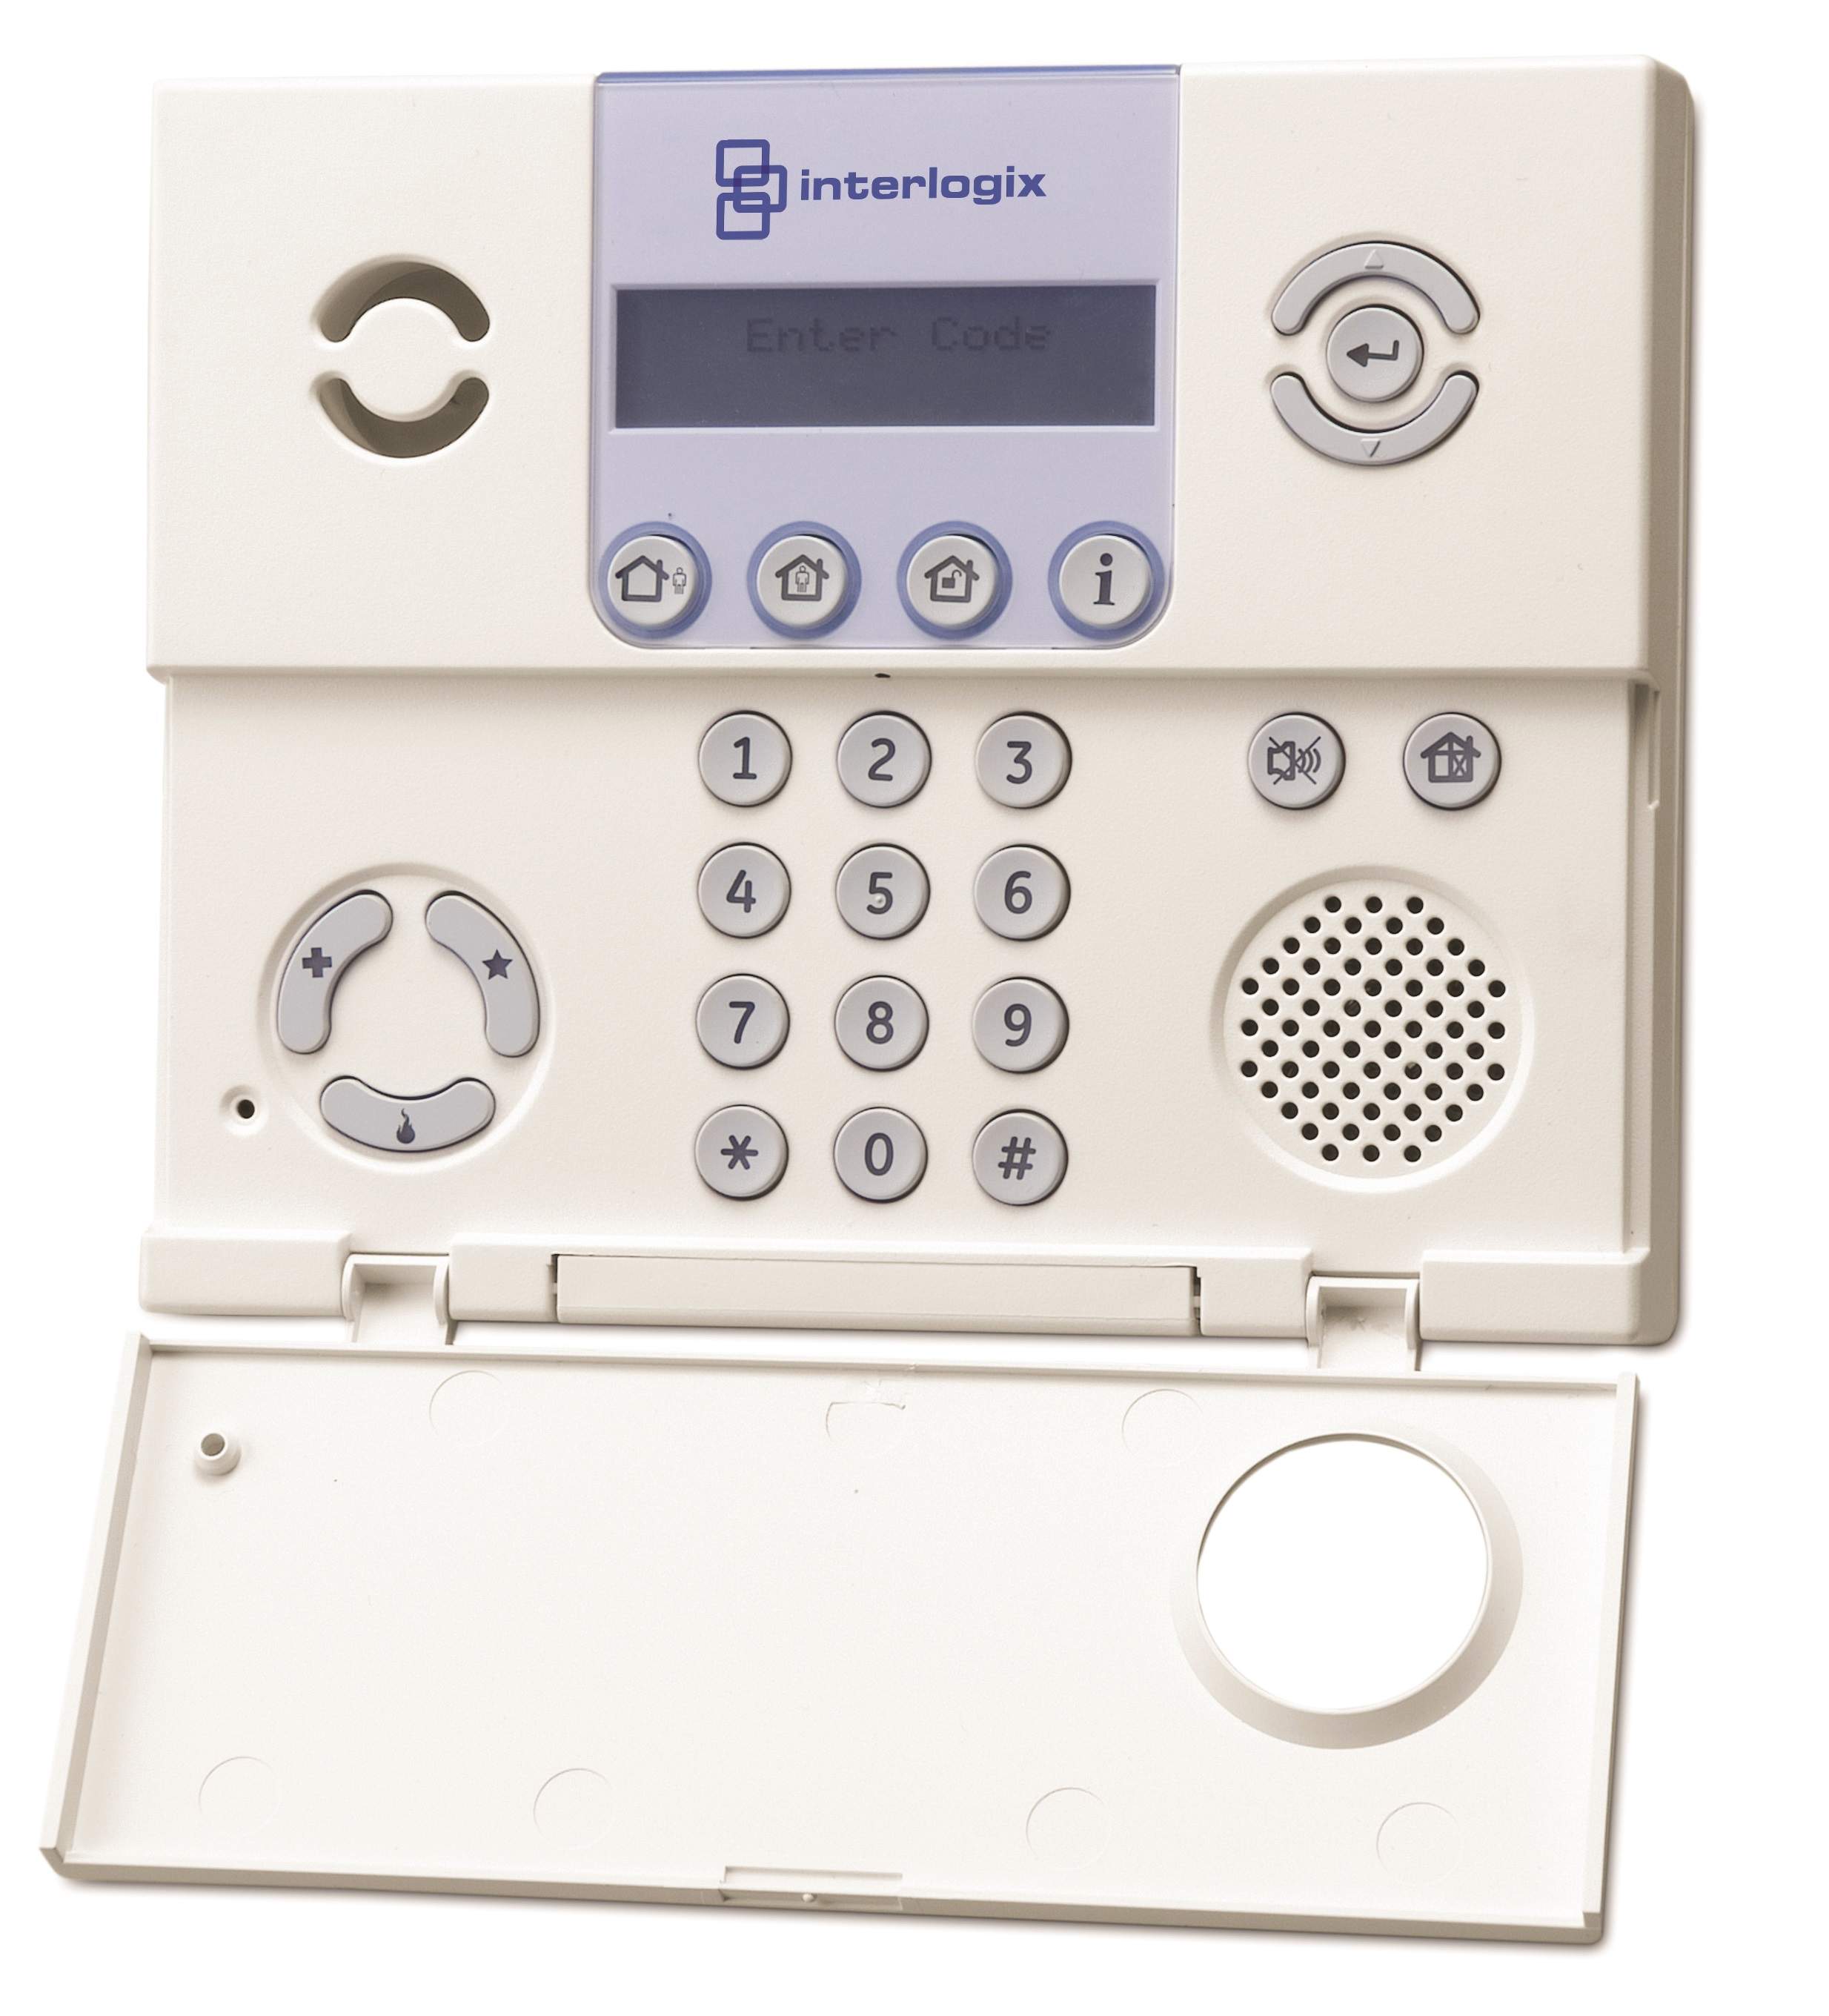 If you have an Interlogix Eircom Phone Watch panel you can upgrade and keep your existing devices